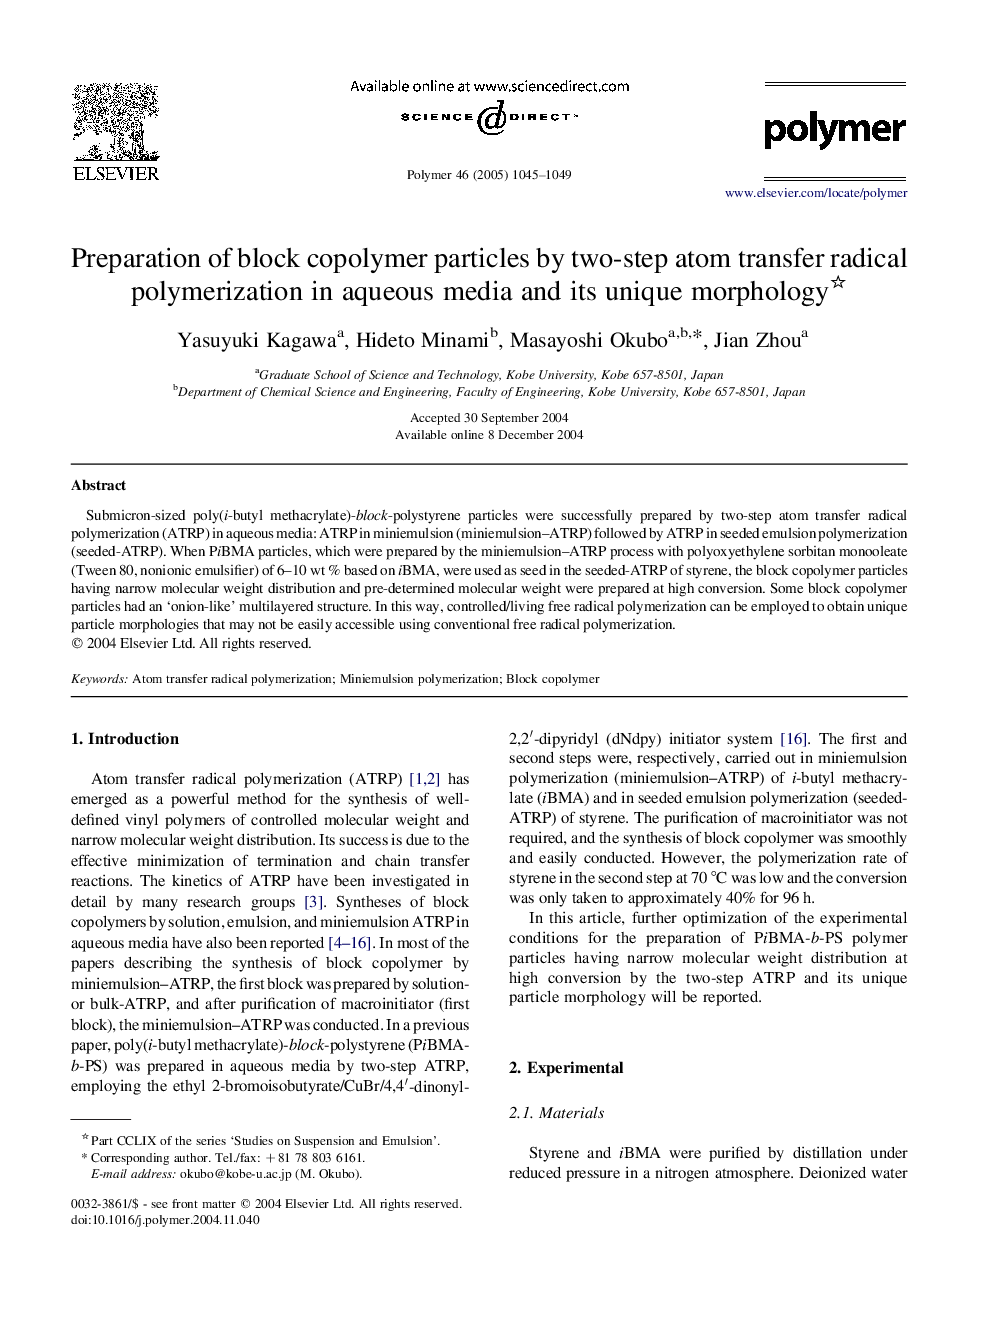 Preparation of block copolymer particles by two-step atom transfer radical polymerization in aqueous media and its unique morphology